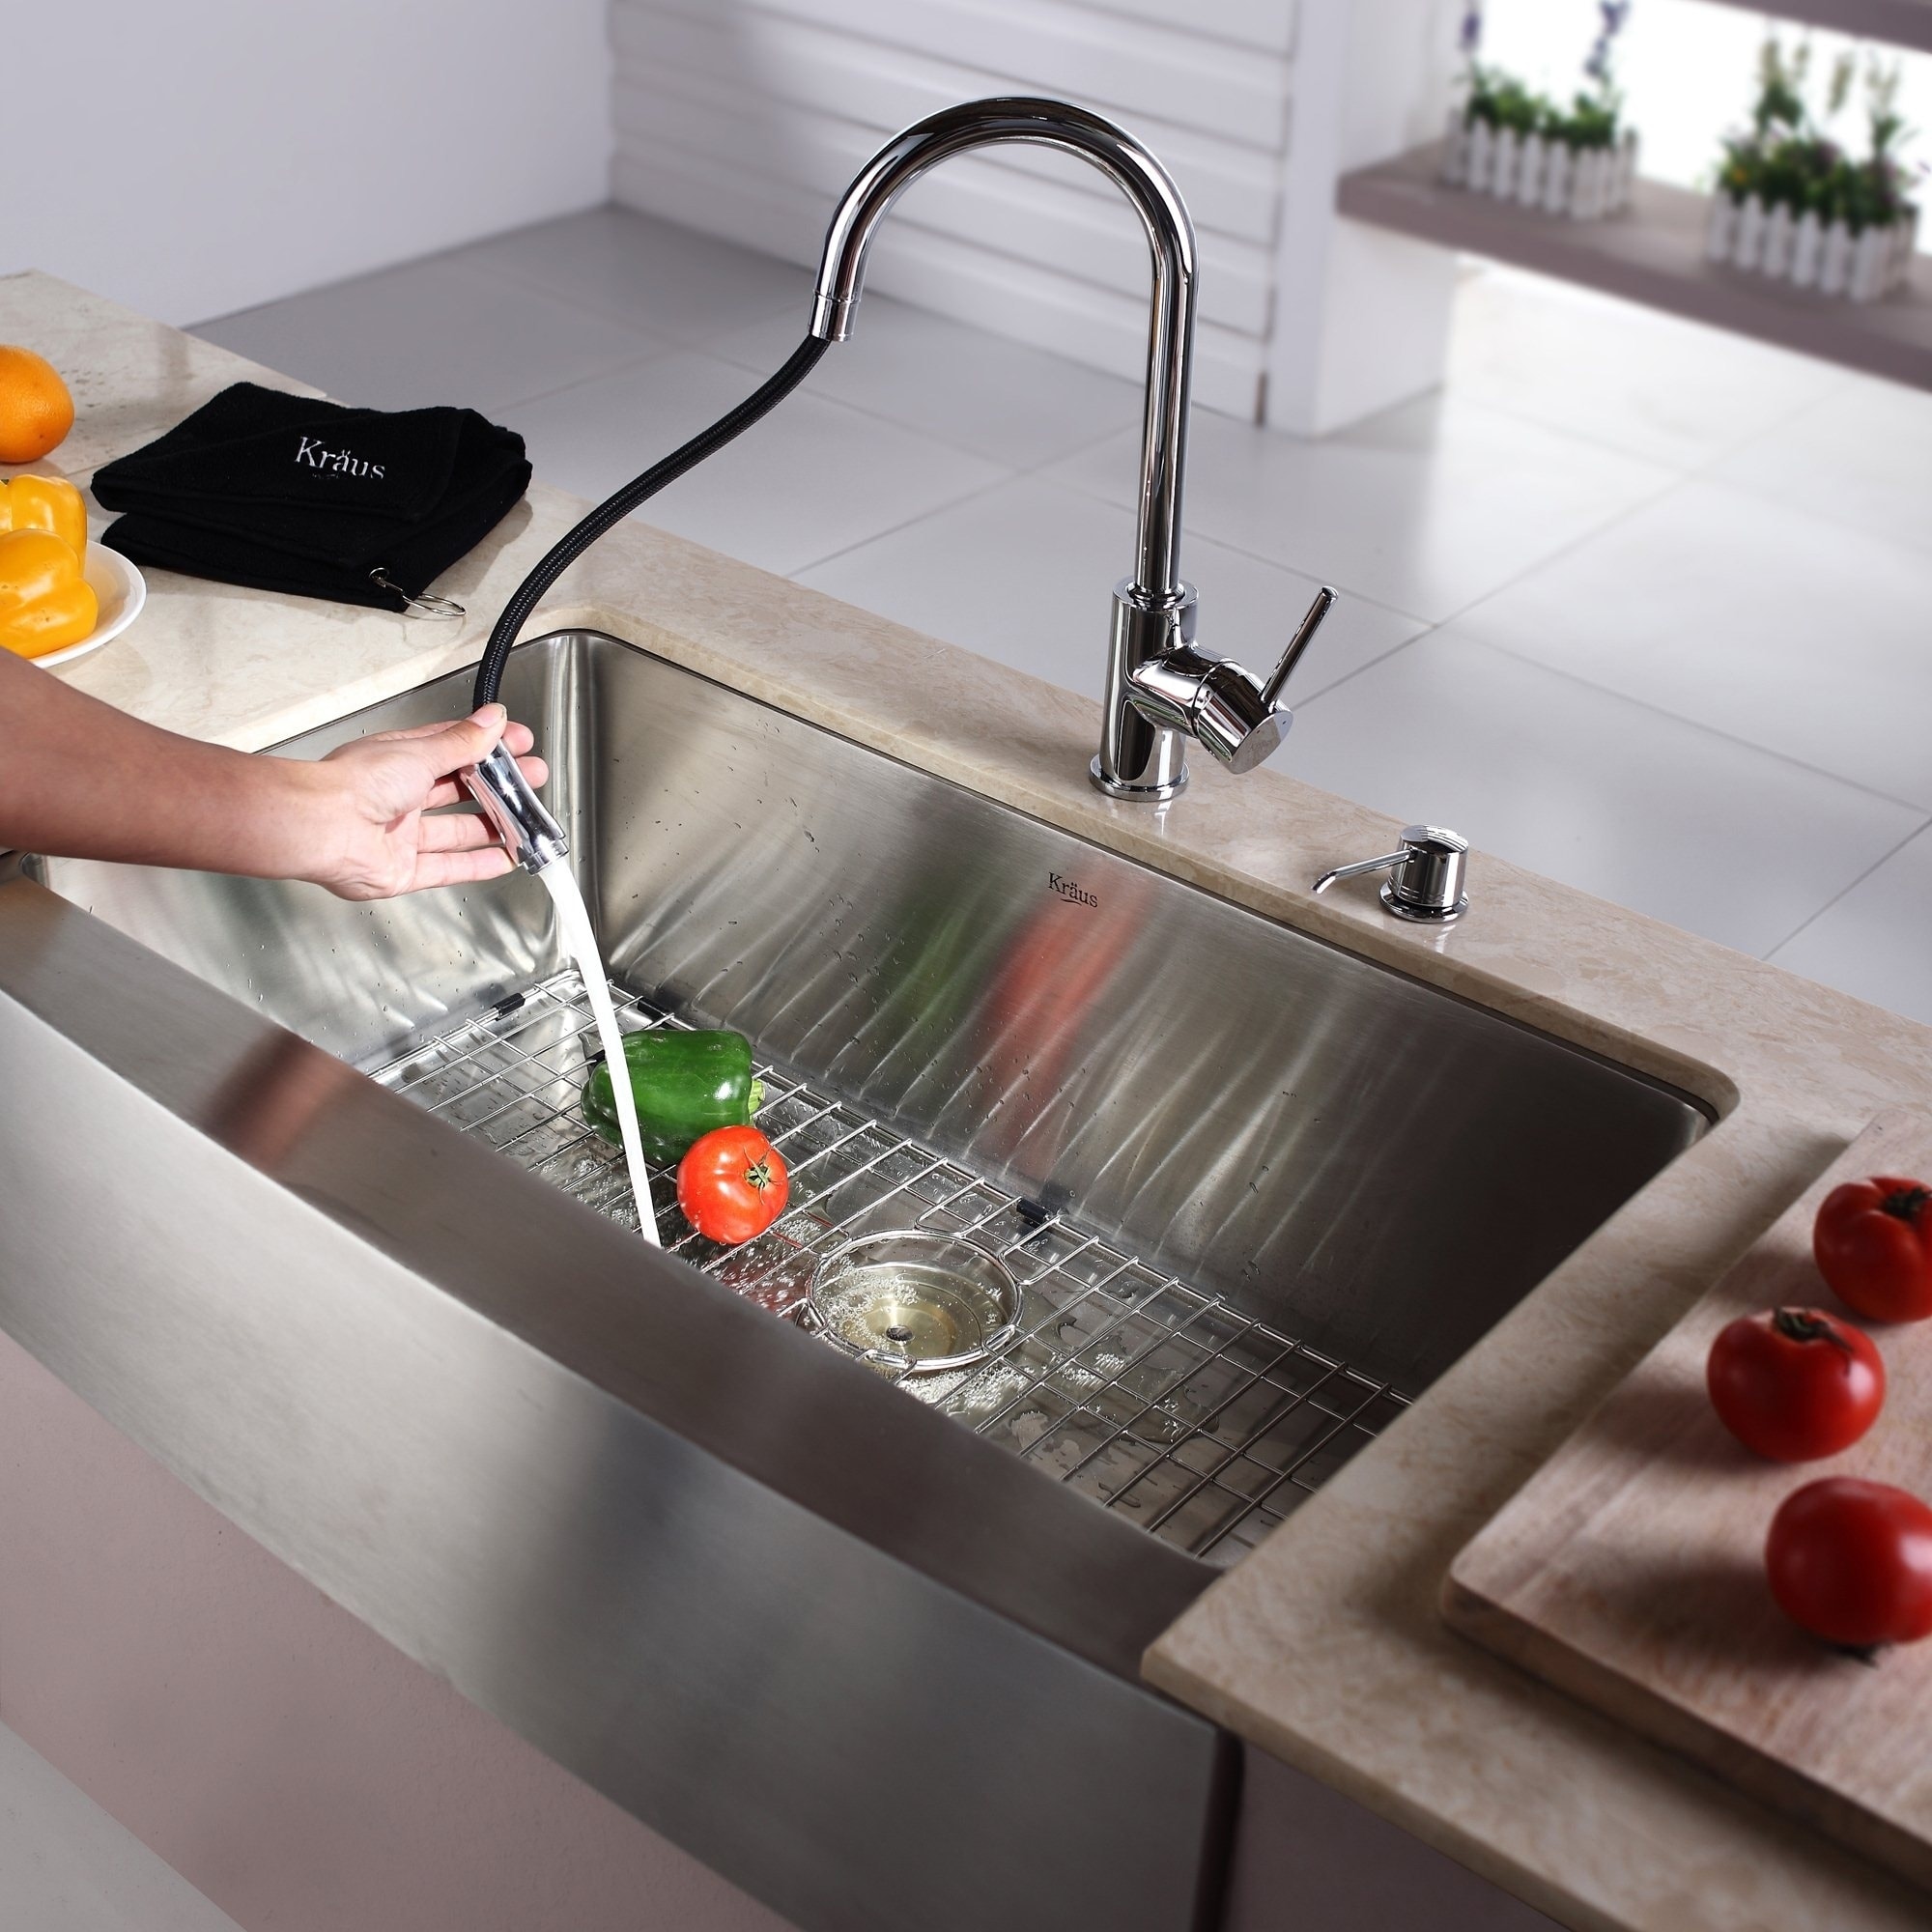 https://ak1.ostkcdn.com/images/products/4655374/KRAUS-36-Inch-Farmhouse-Single-Bowl-Stainless-Steel-Kitchen-Sink-with-Pull-Down-Kitchen-Faucet-and-Soap-Dispenser-9e909385-a0b7-44f9-b260-ea1093f5de2c.jpg